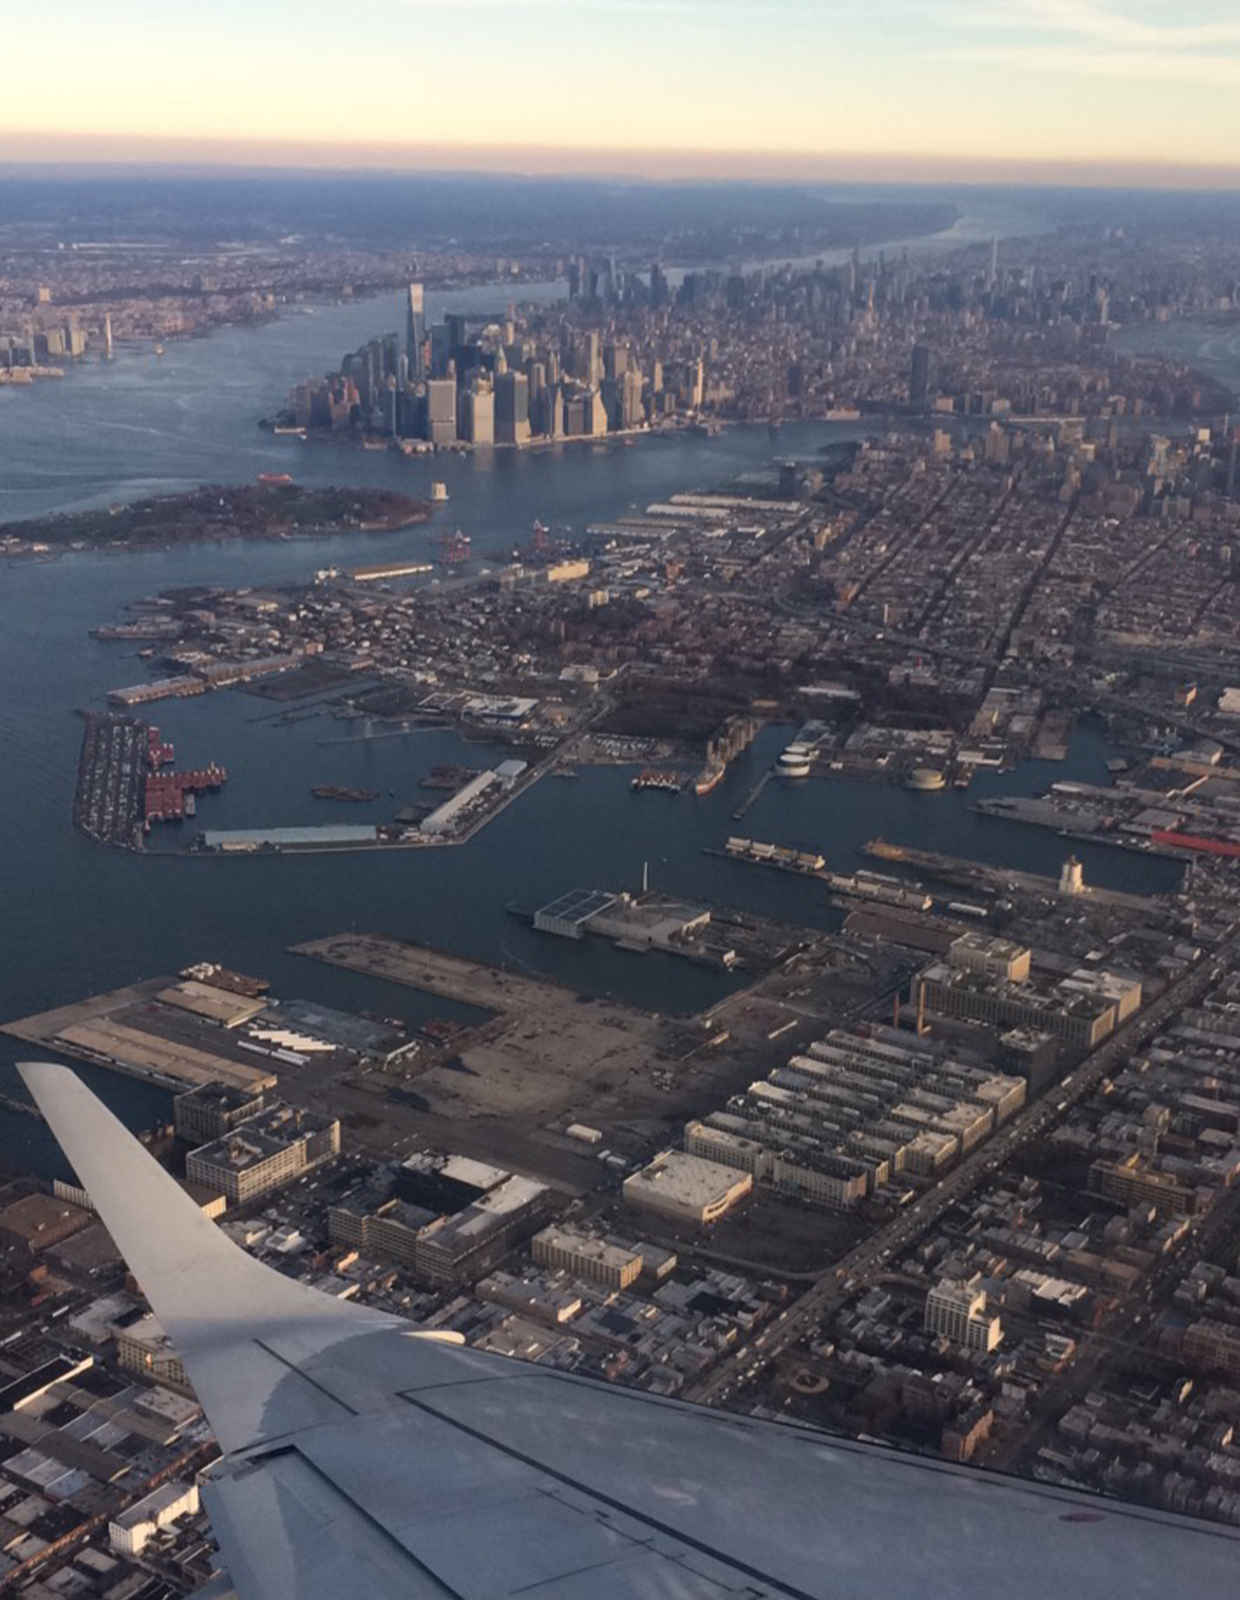 Overlooking many of the places open in NYC as Courtenay flies into LaGuardia Airport.